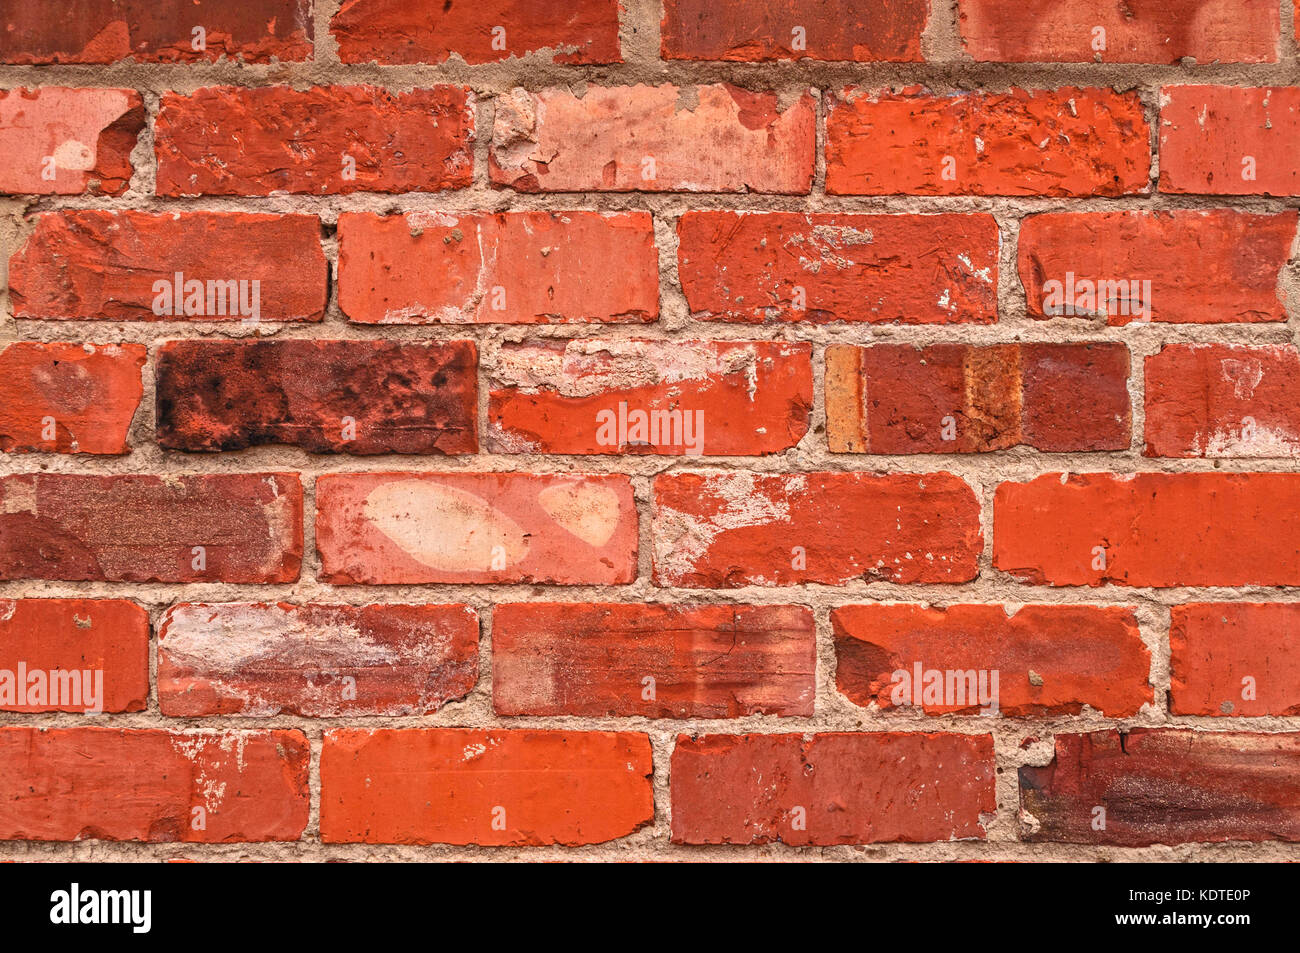 Brick wall, orange, red seamless background with copy space Stock Photo